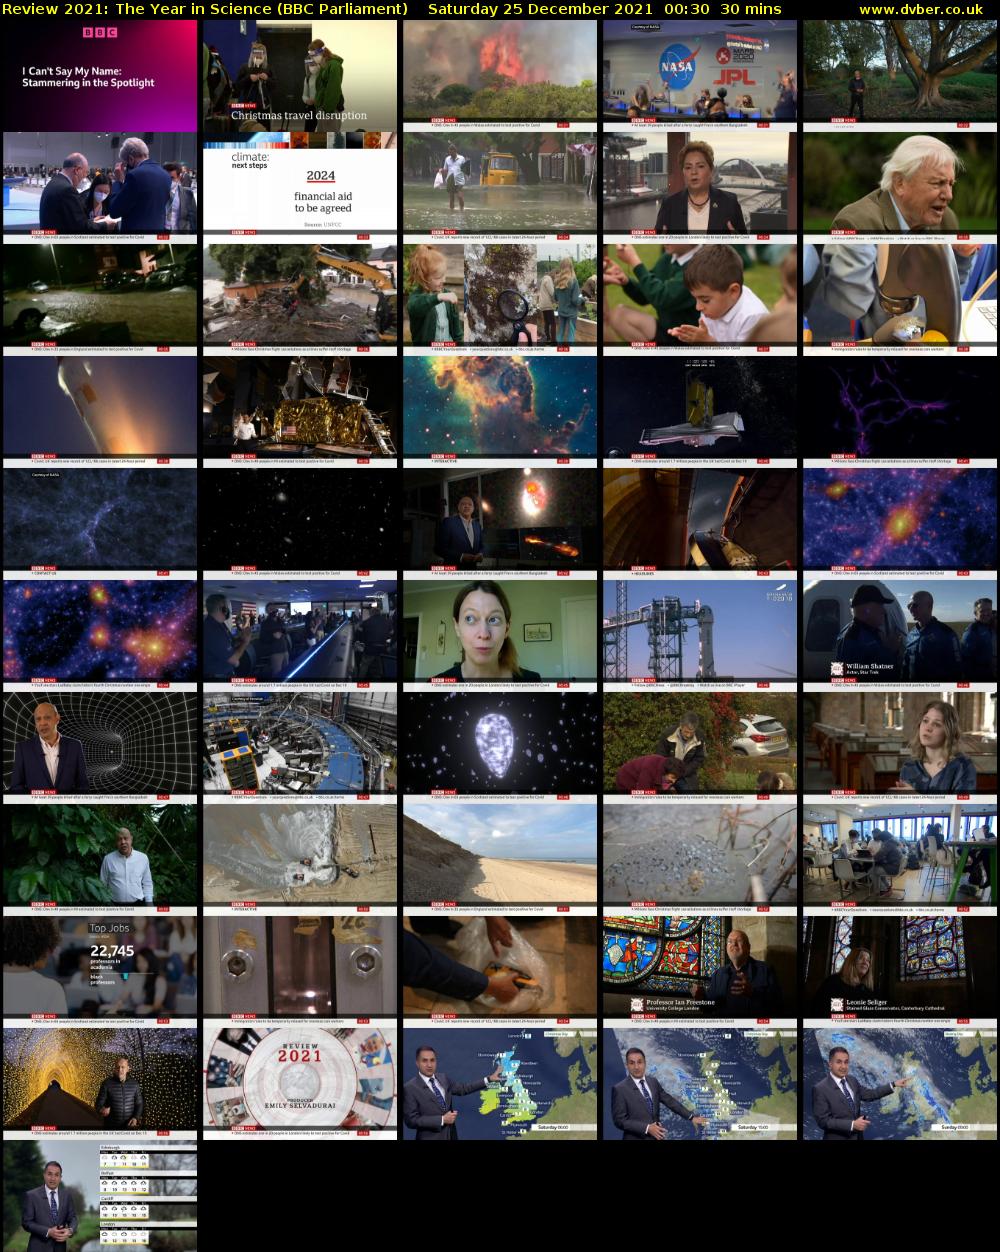 Review 2021: The Year in Science (BBC Parliament) Saturday 25 December 2021 00:30 - 01:00